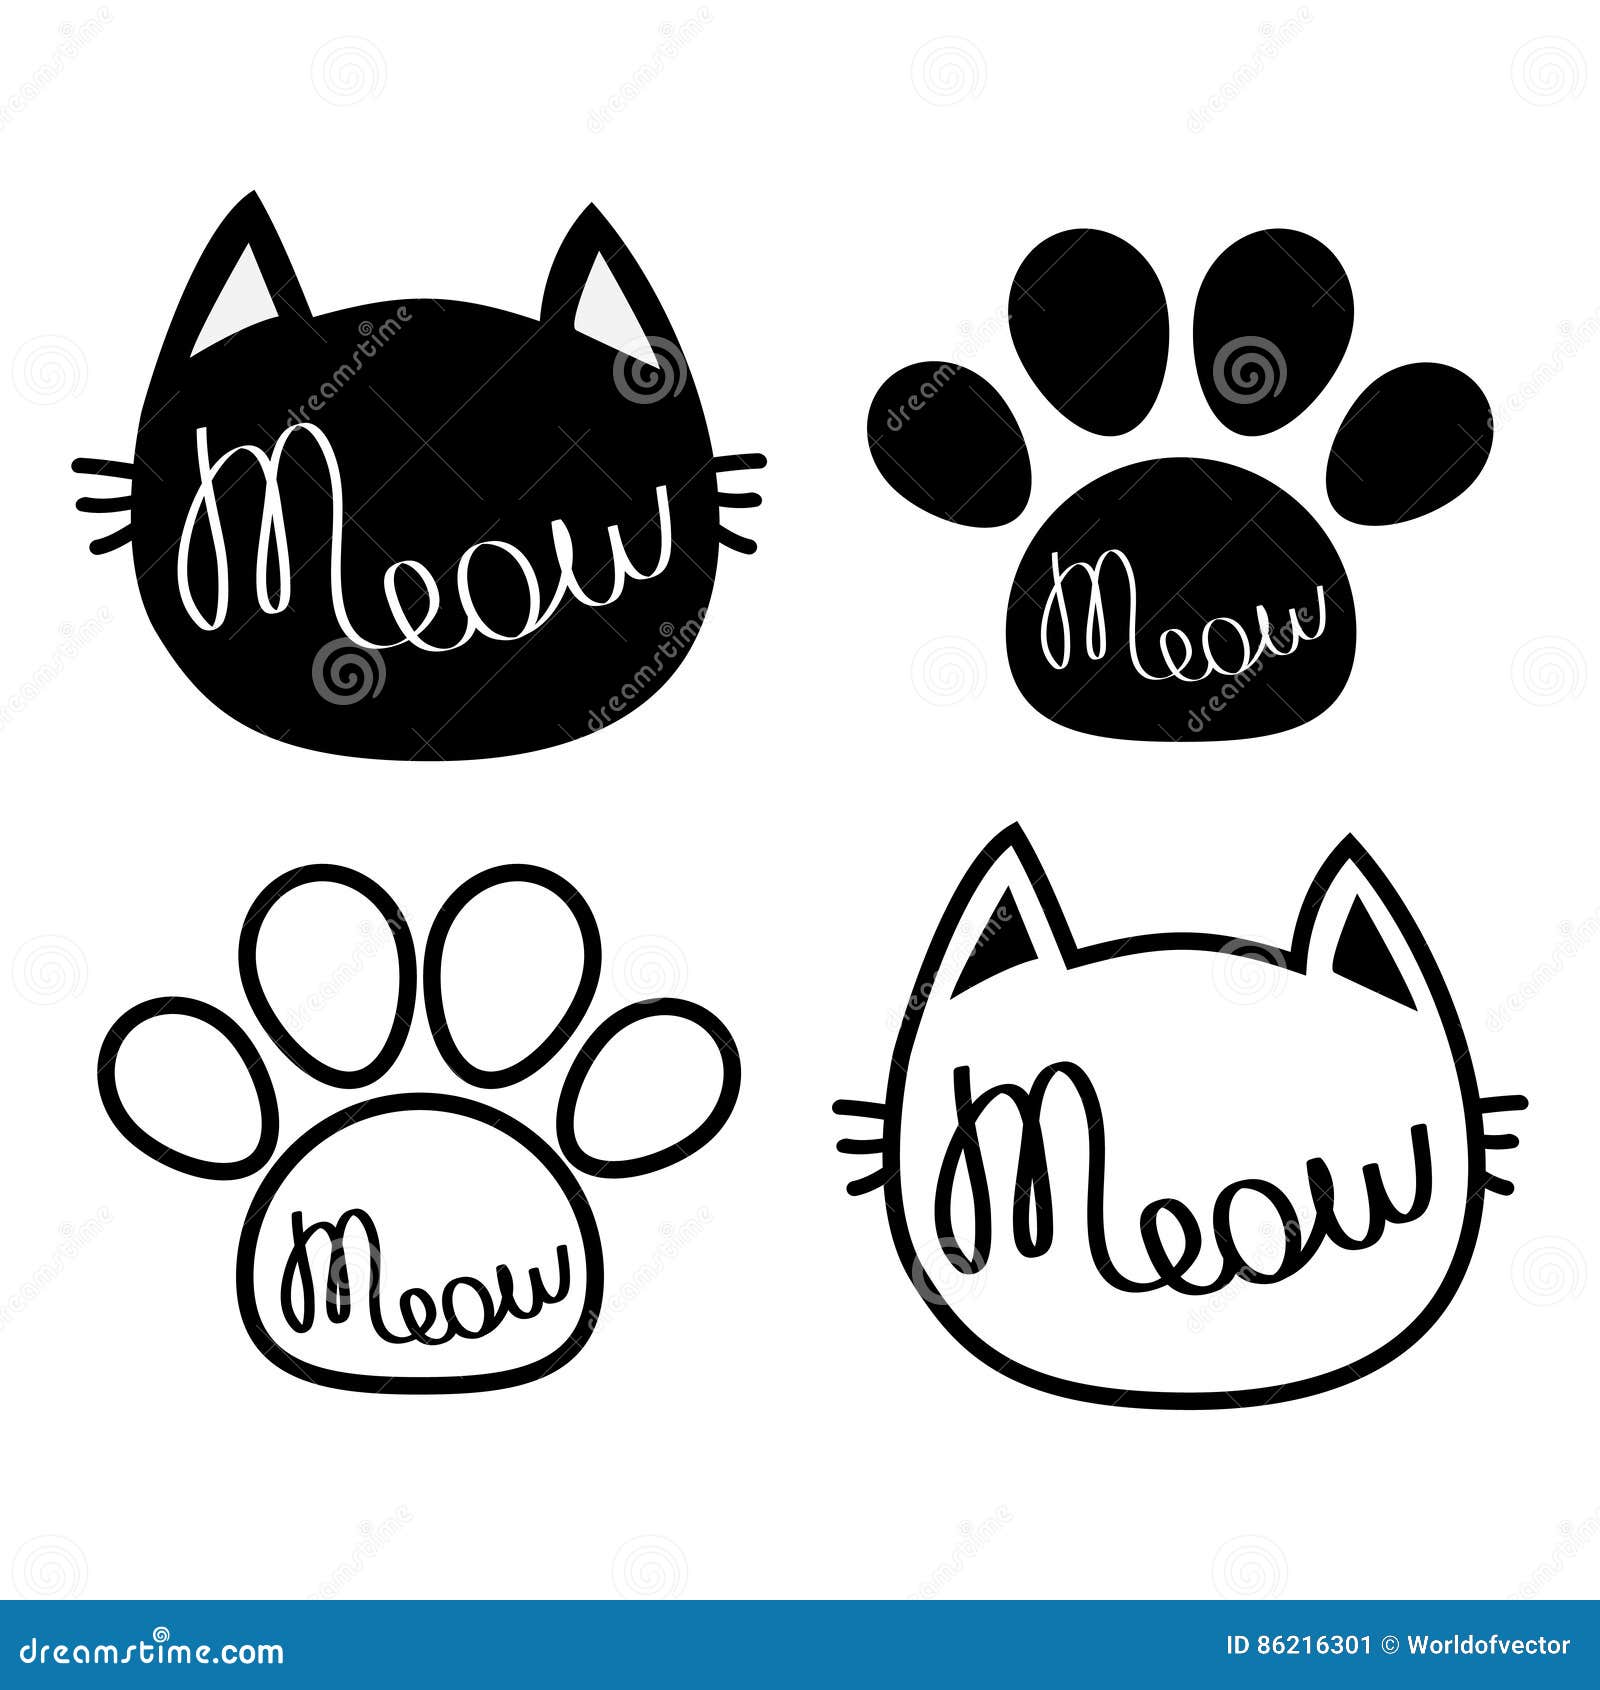 Black Cat Head. Meow Lettering Contour Text. Paw Print. Cute Cartoon  Character Silhouette Icon Set. Kawaii Animal Stock Vector - Illustration of  lettering, child: 86216301